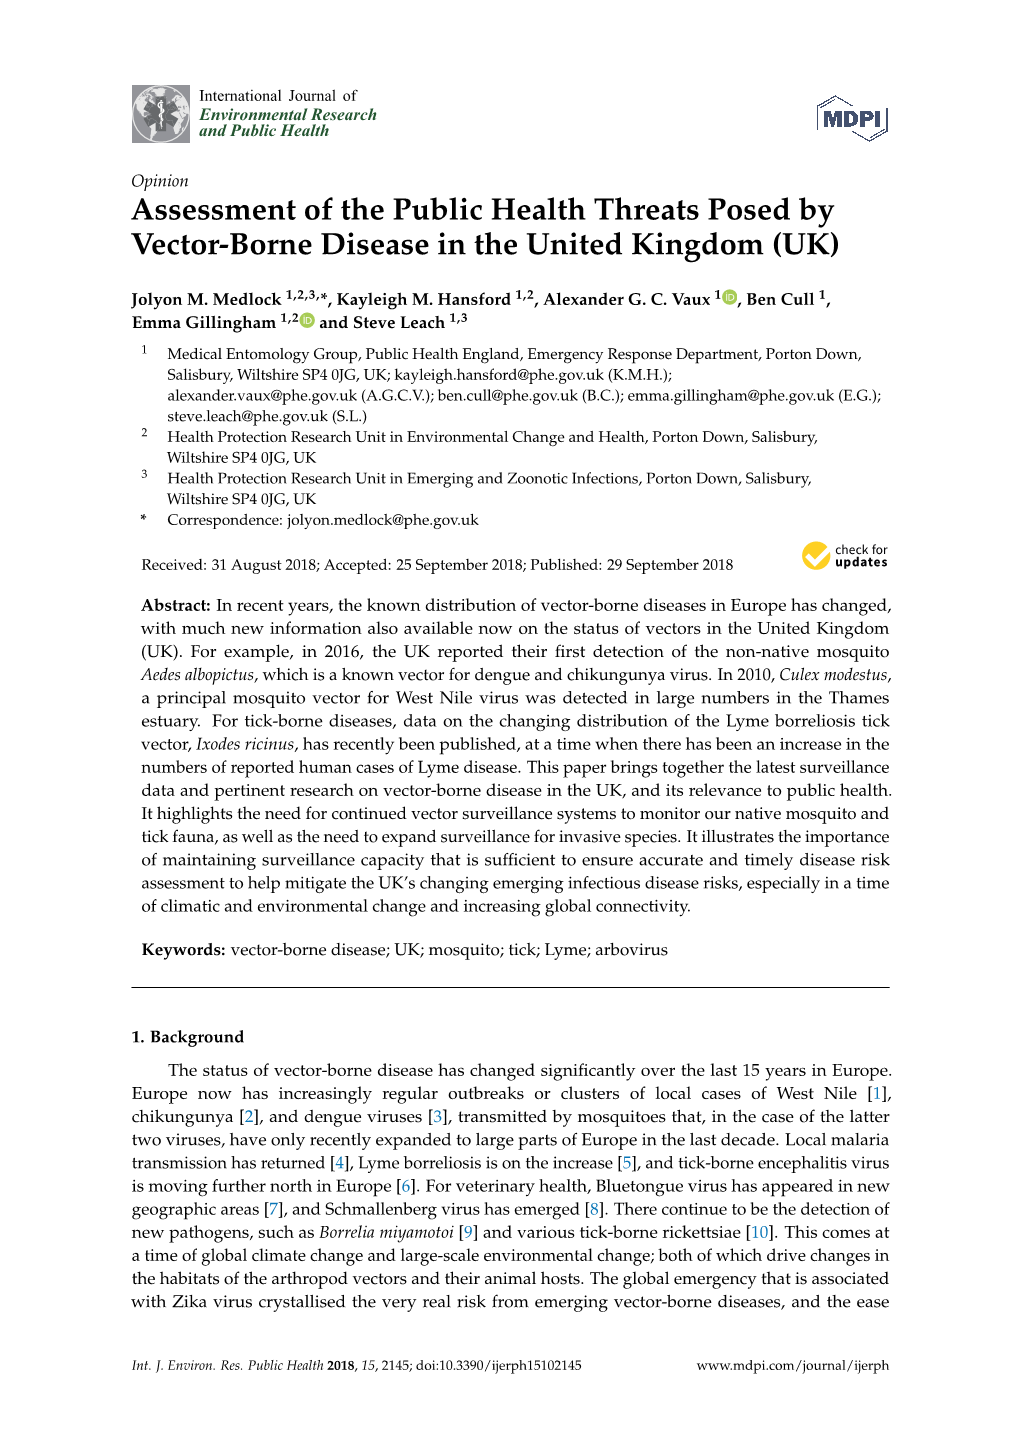 Assessment of the Public Health Threats Posed by Vector-Borne Disease in the United Kingdom (UK)